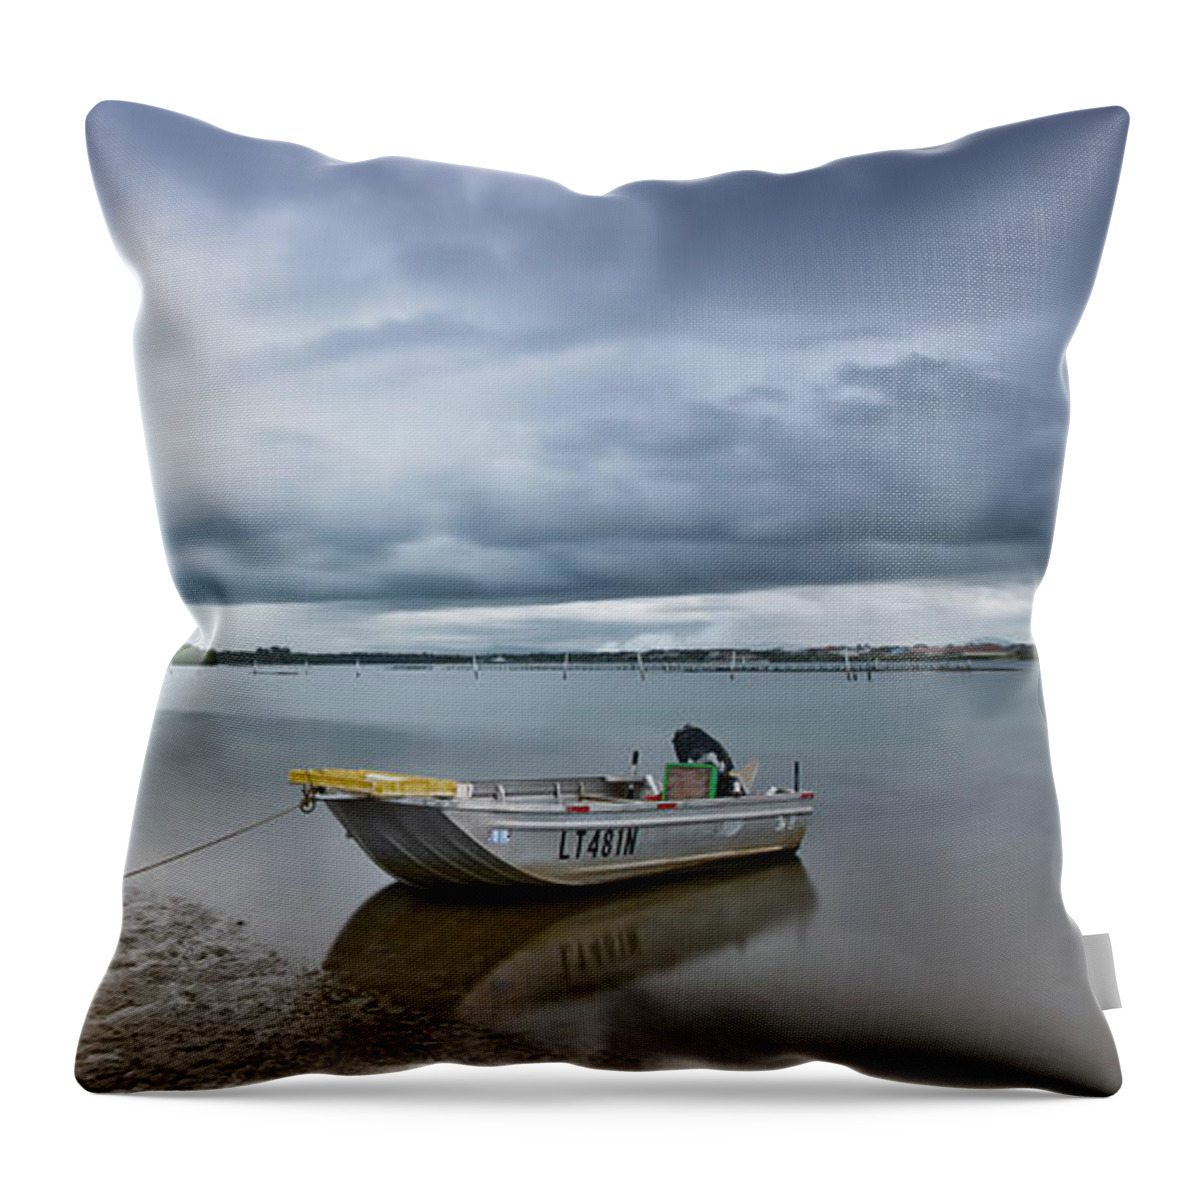 Manning Point Nsw Australia Throw Pillow featuring the digital art Manning Point 21 by Kevin Chippindall